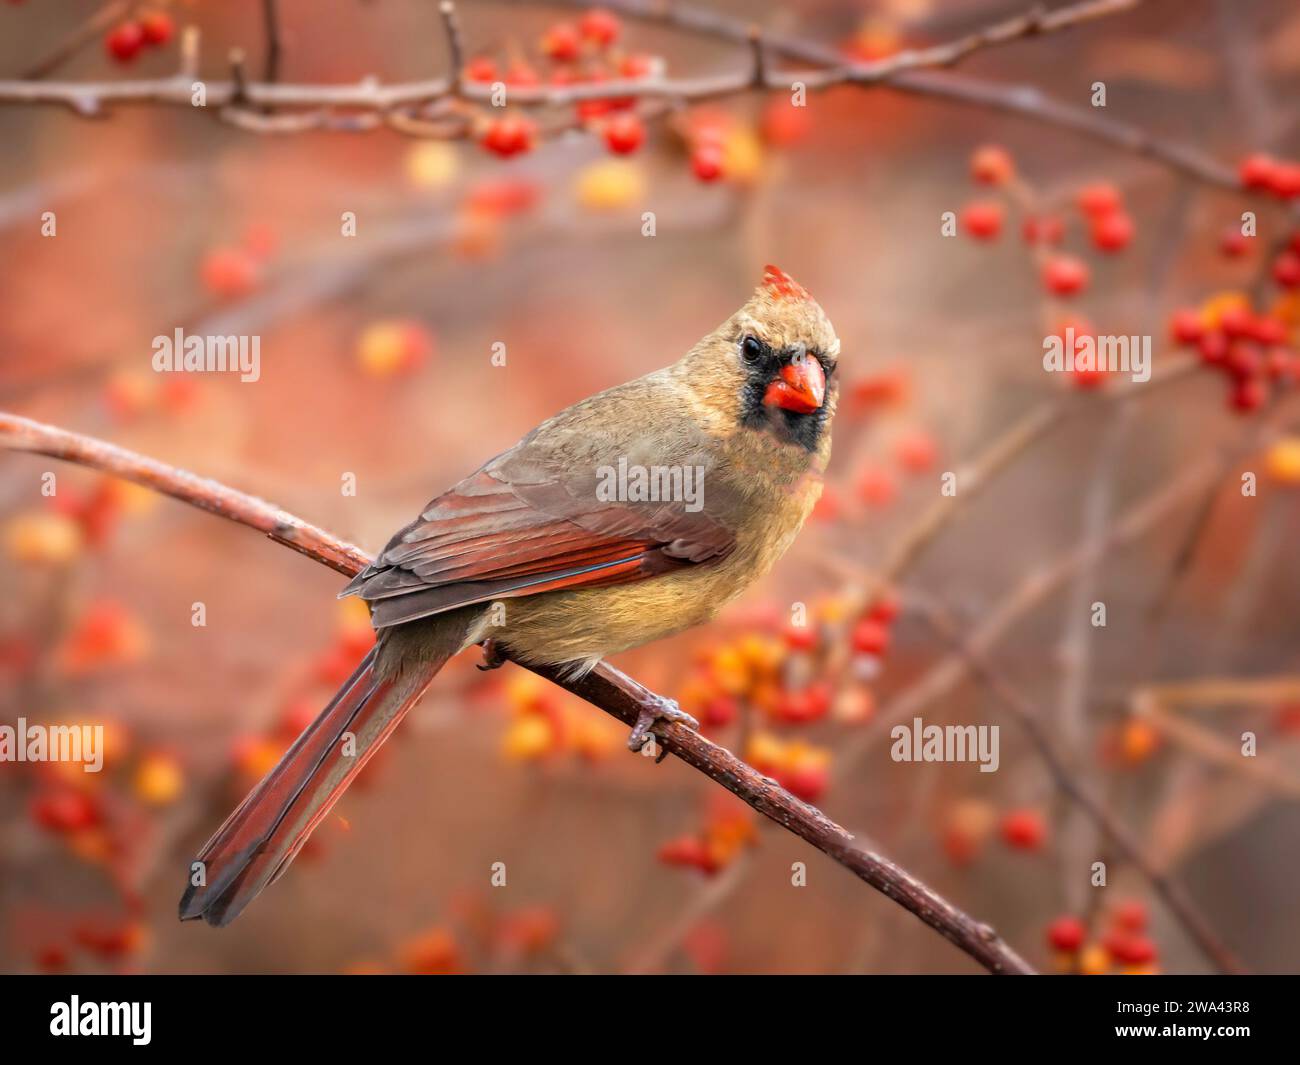 Female Northern Cardinal among red berries Stock Photo